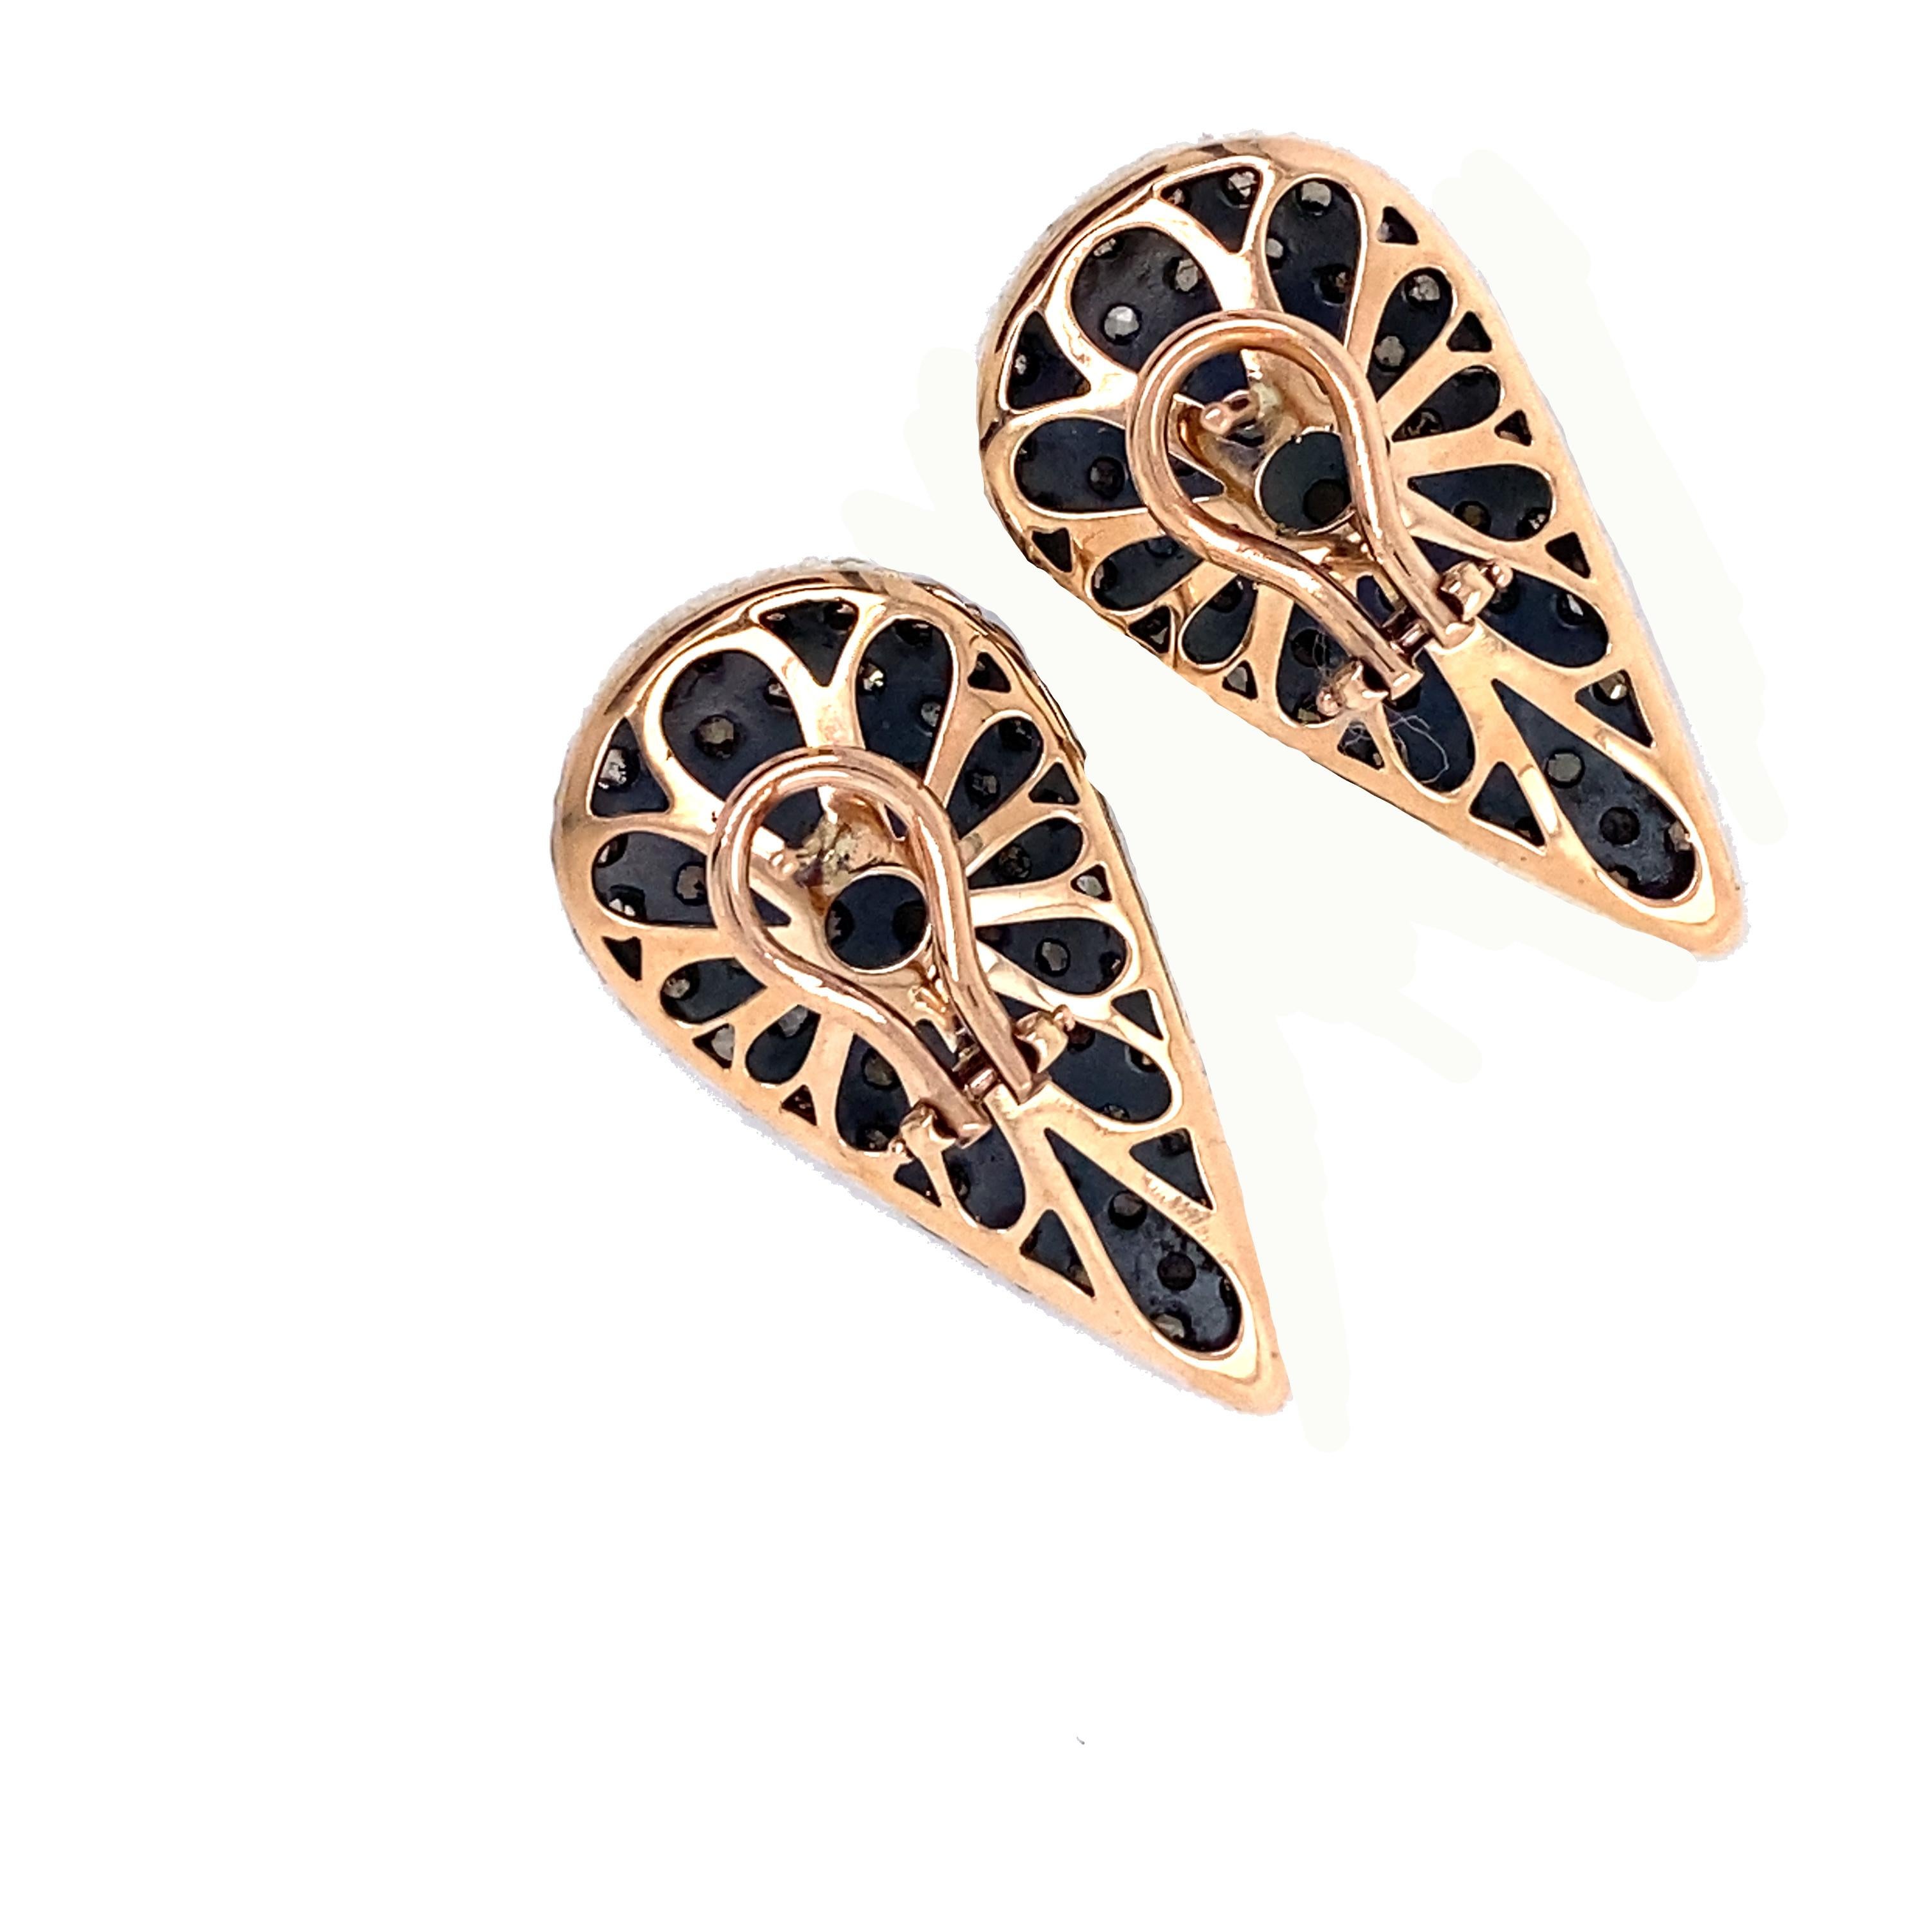 Contemporary 21st Century 9 Karat Rose Gold and Diamond Drop-Shape Cesellato Earrings For Sale